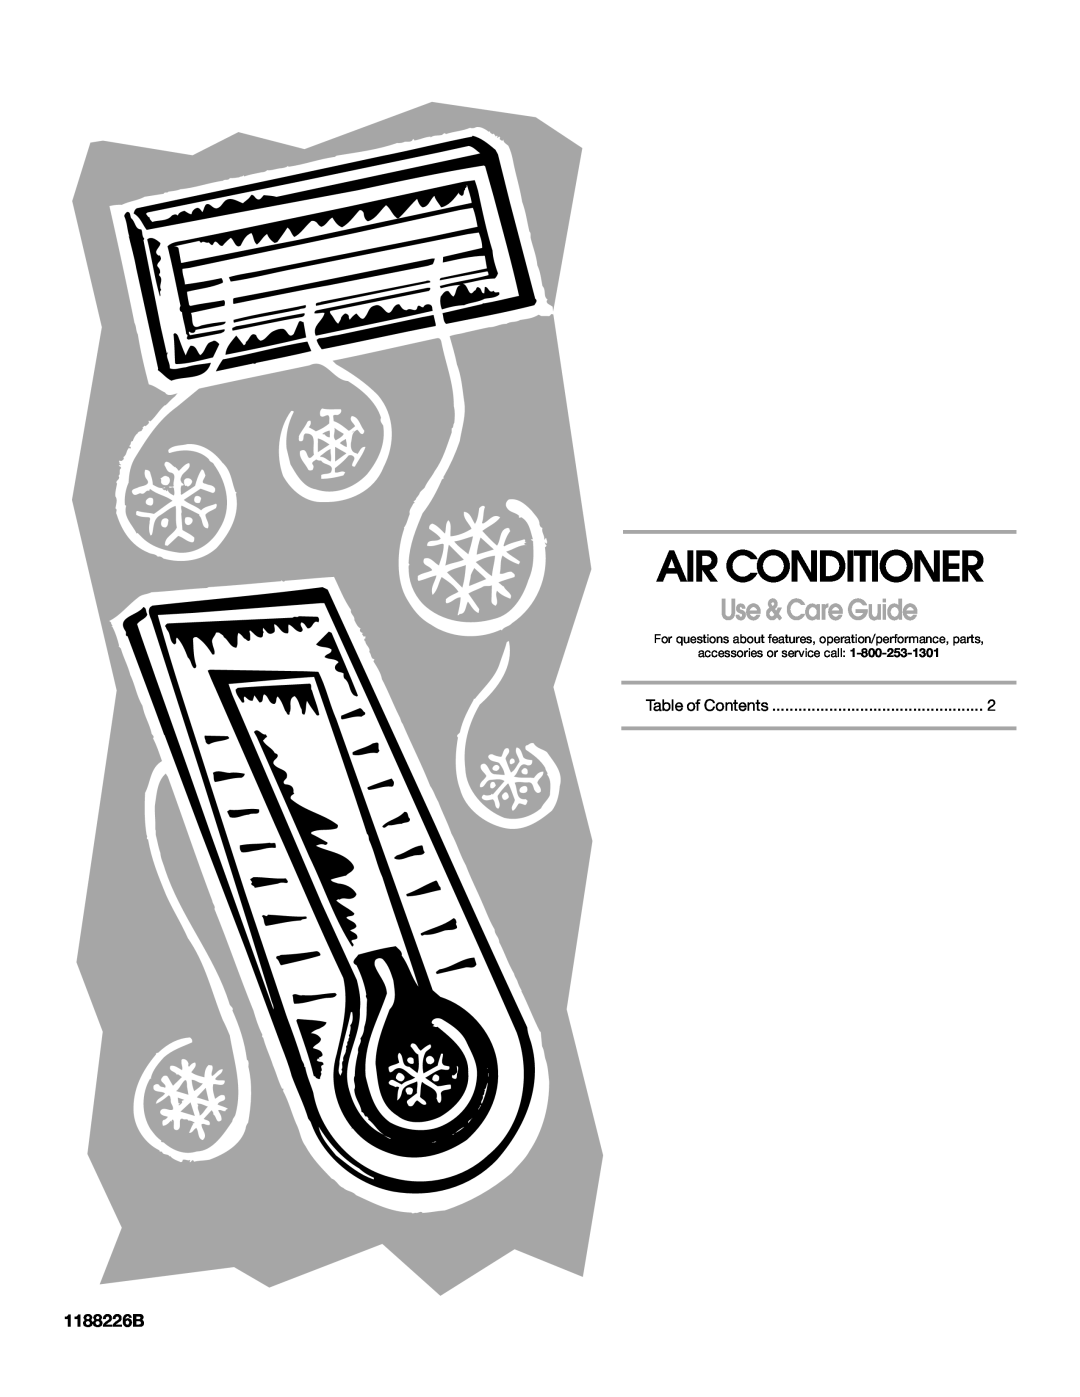 Whirlpool CA15WYR0 manual 1188226B, Air Conditioner, Use & Care Guide, accessories or service call 